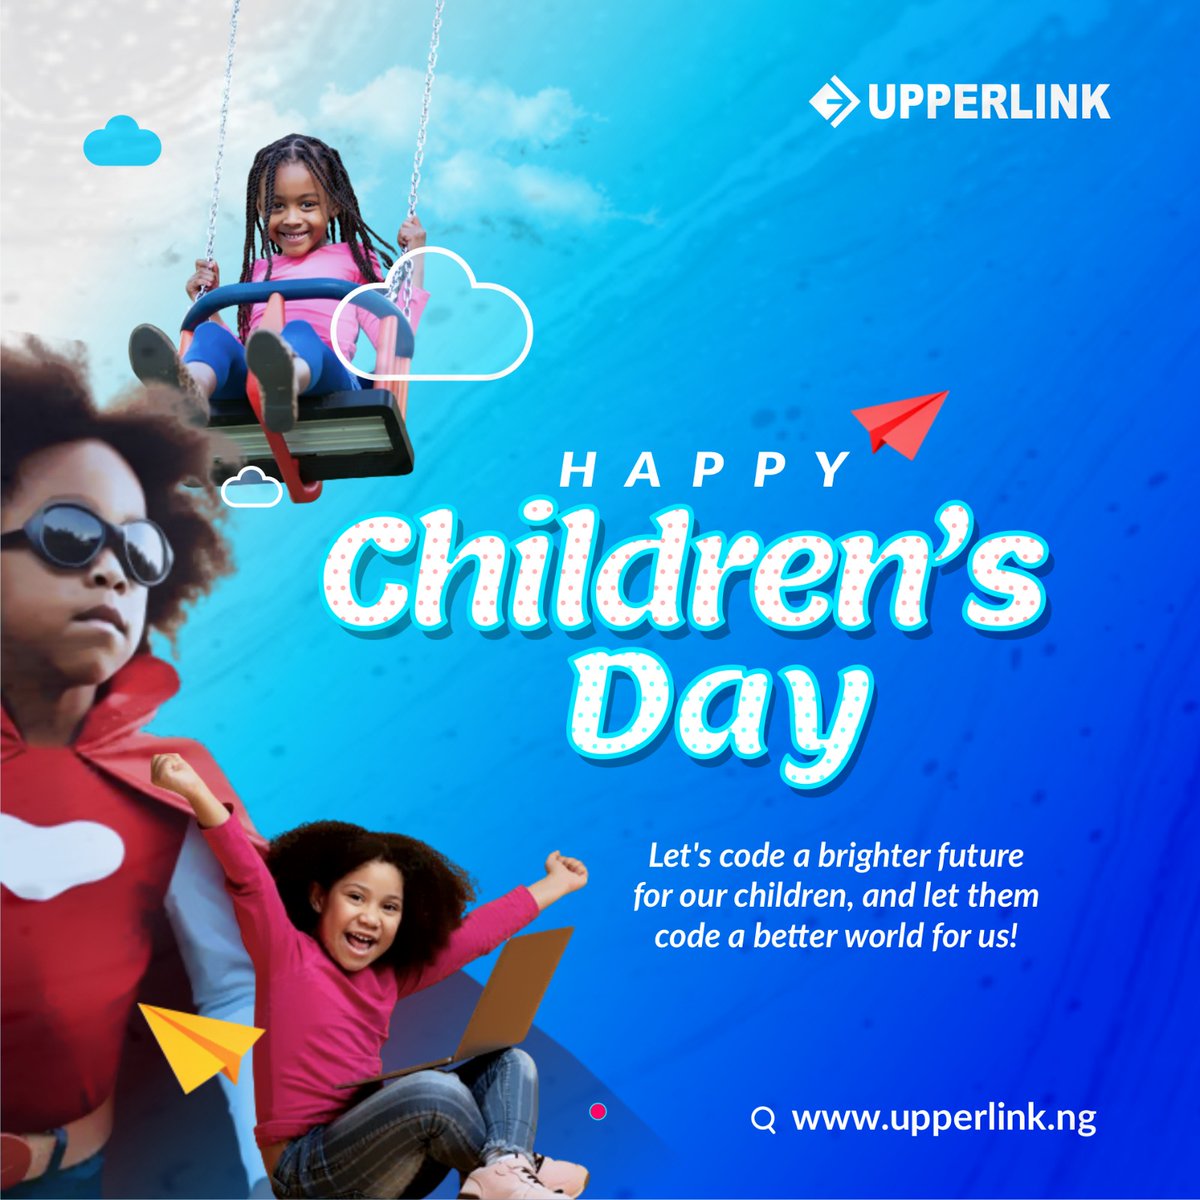 Children are the champions of change, using their imagination and creativity to make the world a better place. 
Happy children's Day from all of us at Upperlink!

#upperlink #childrensday #upperlinklimited #kidsforchange